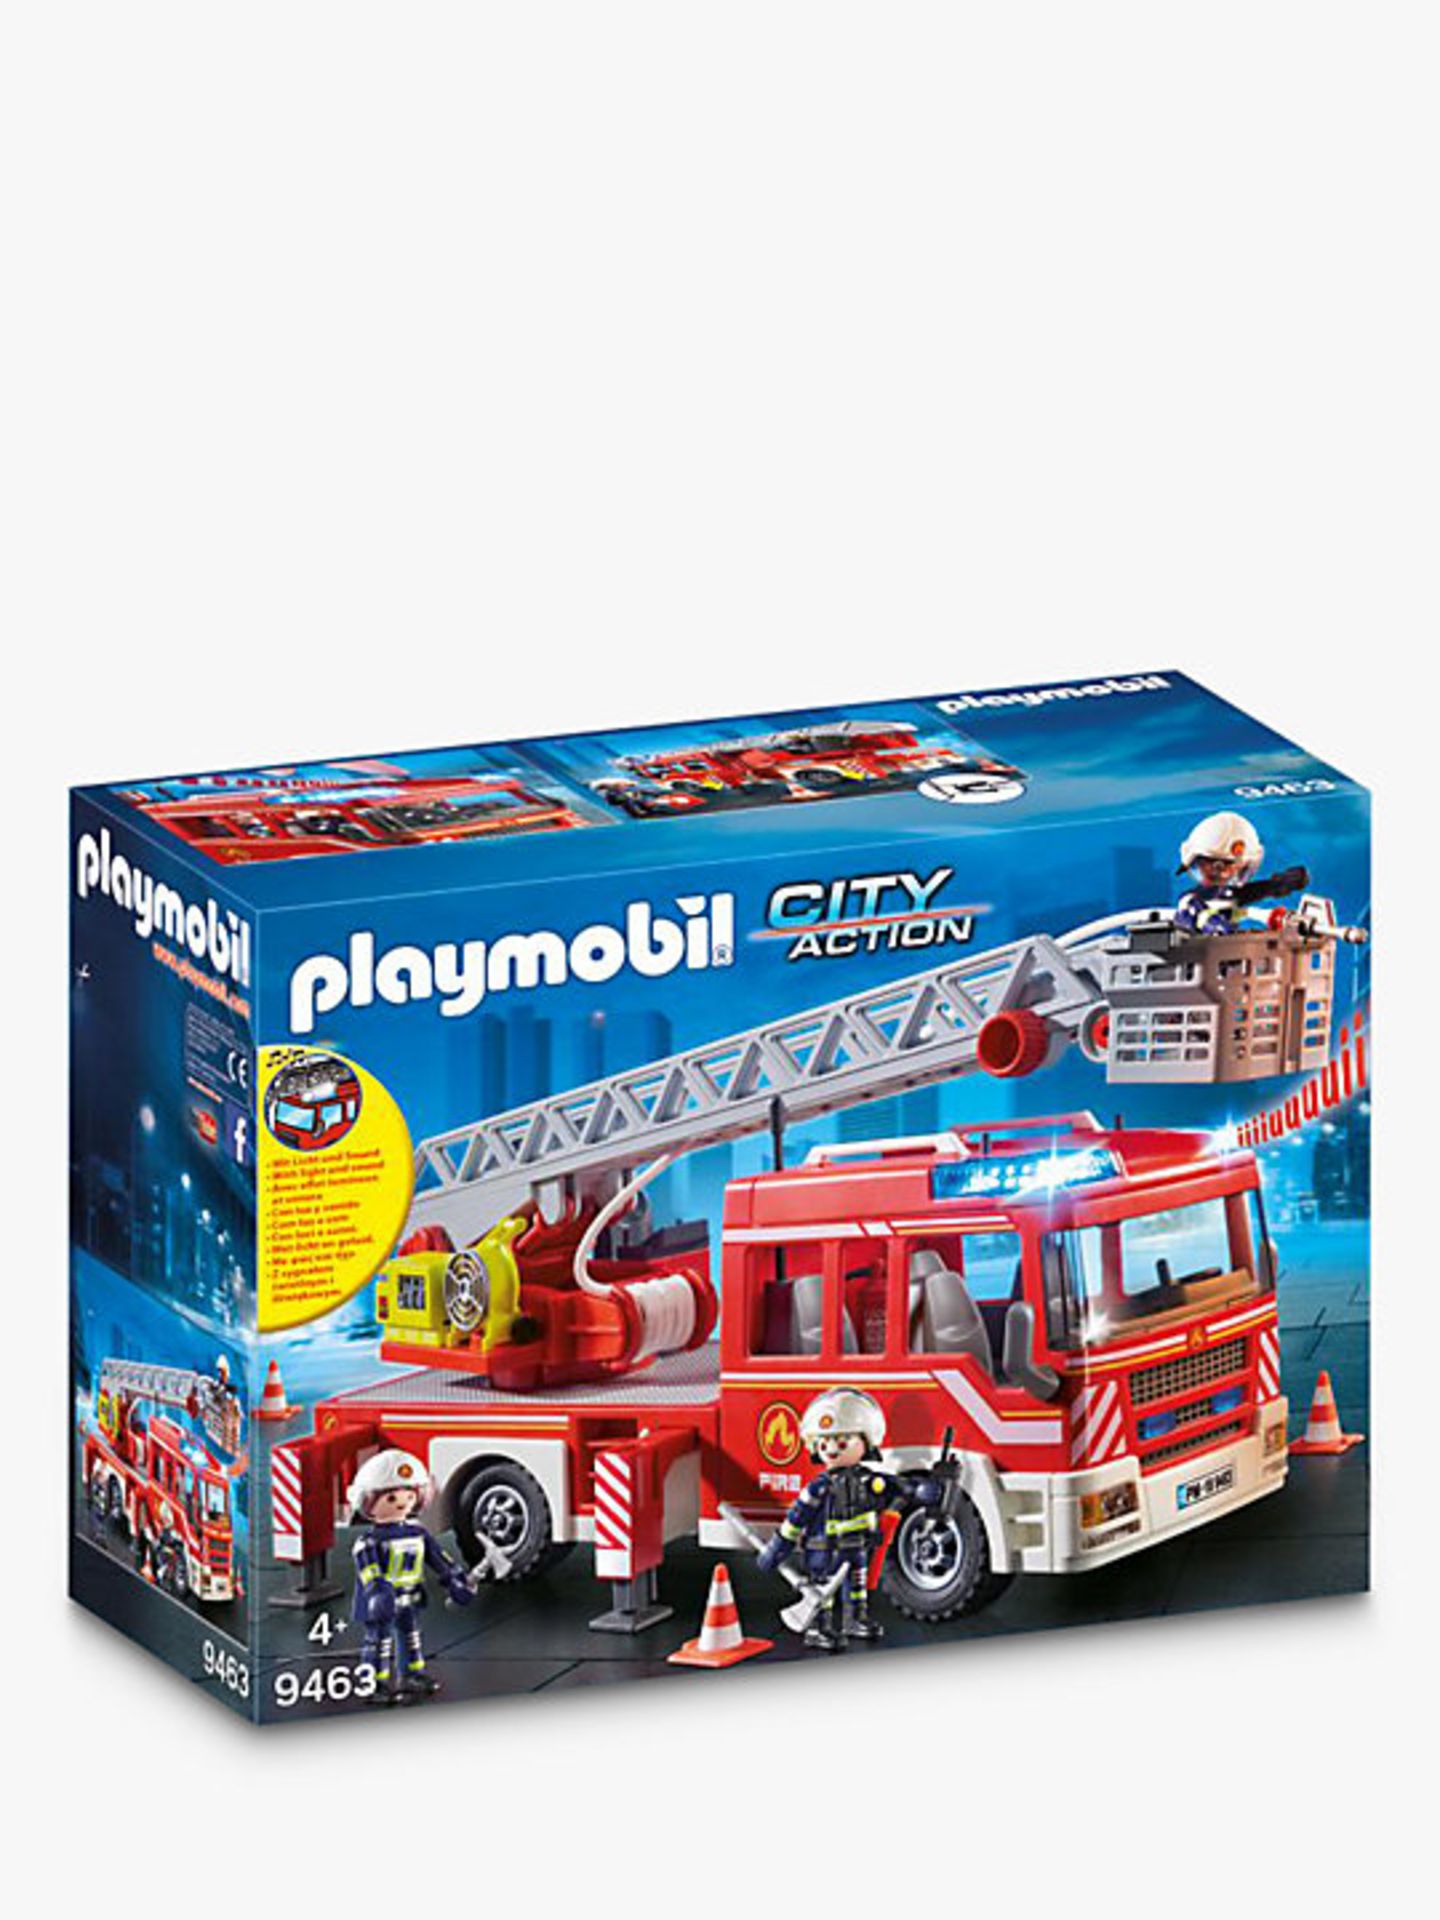 Pallet of Raw Customer Returns - Category - STANDARD TOYS - P100035792 - Image 25 of 27